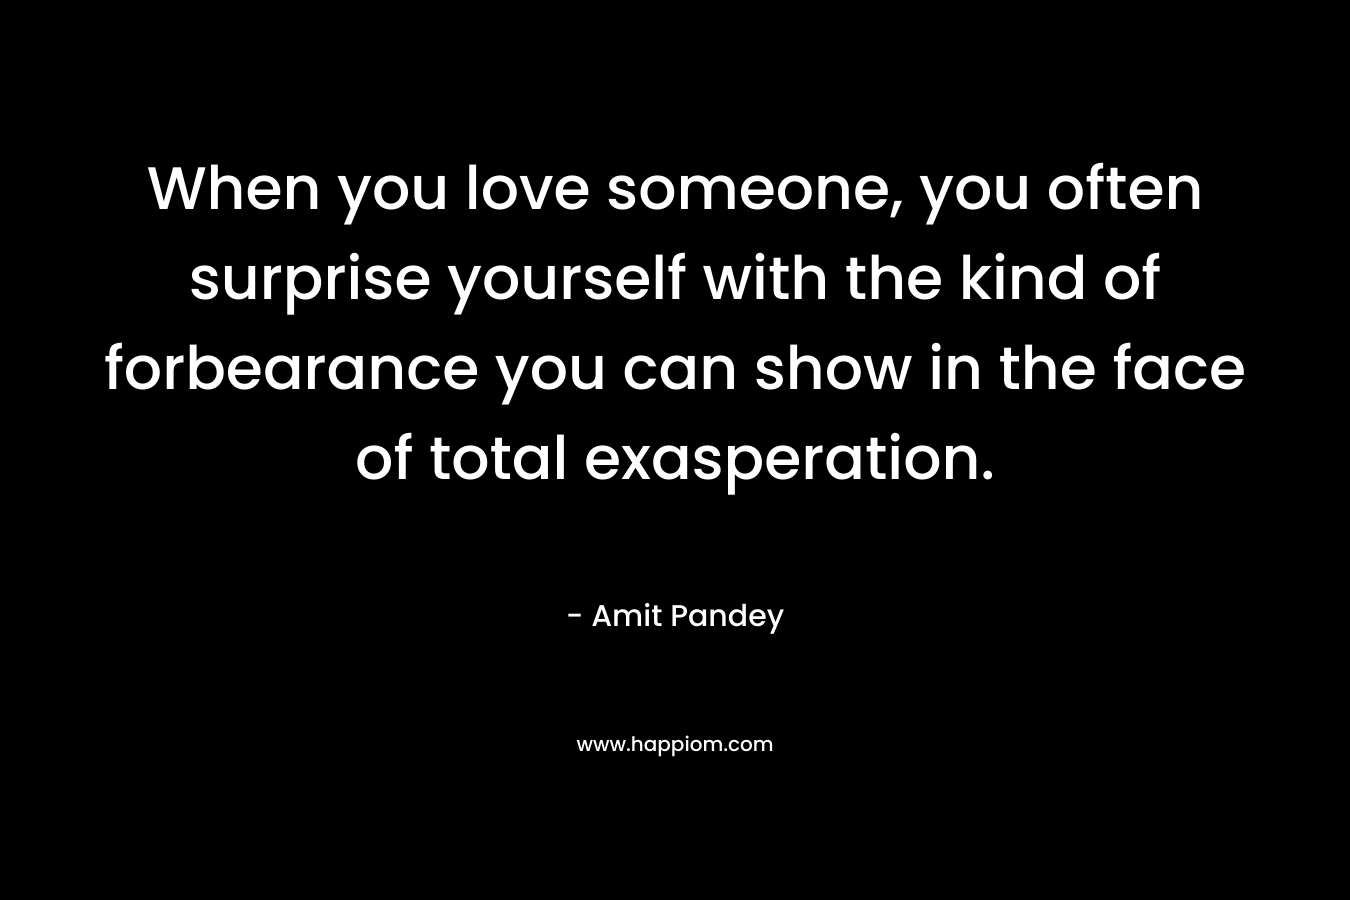 When you love someone, you often surprise yourself with the kind of forbearance you can show in the face of total exasperation.